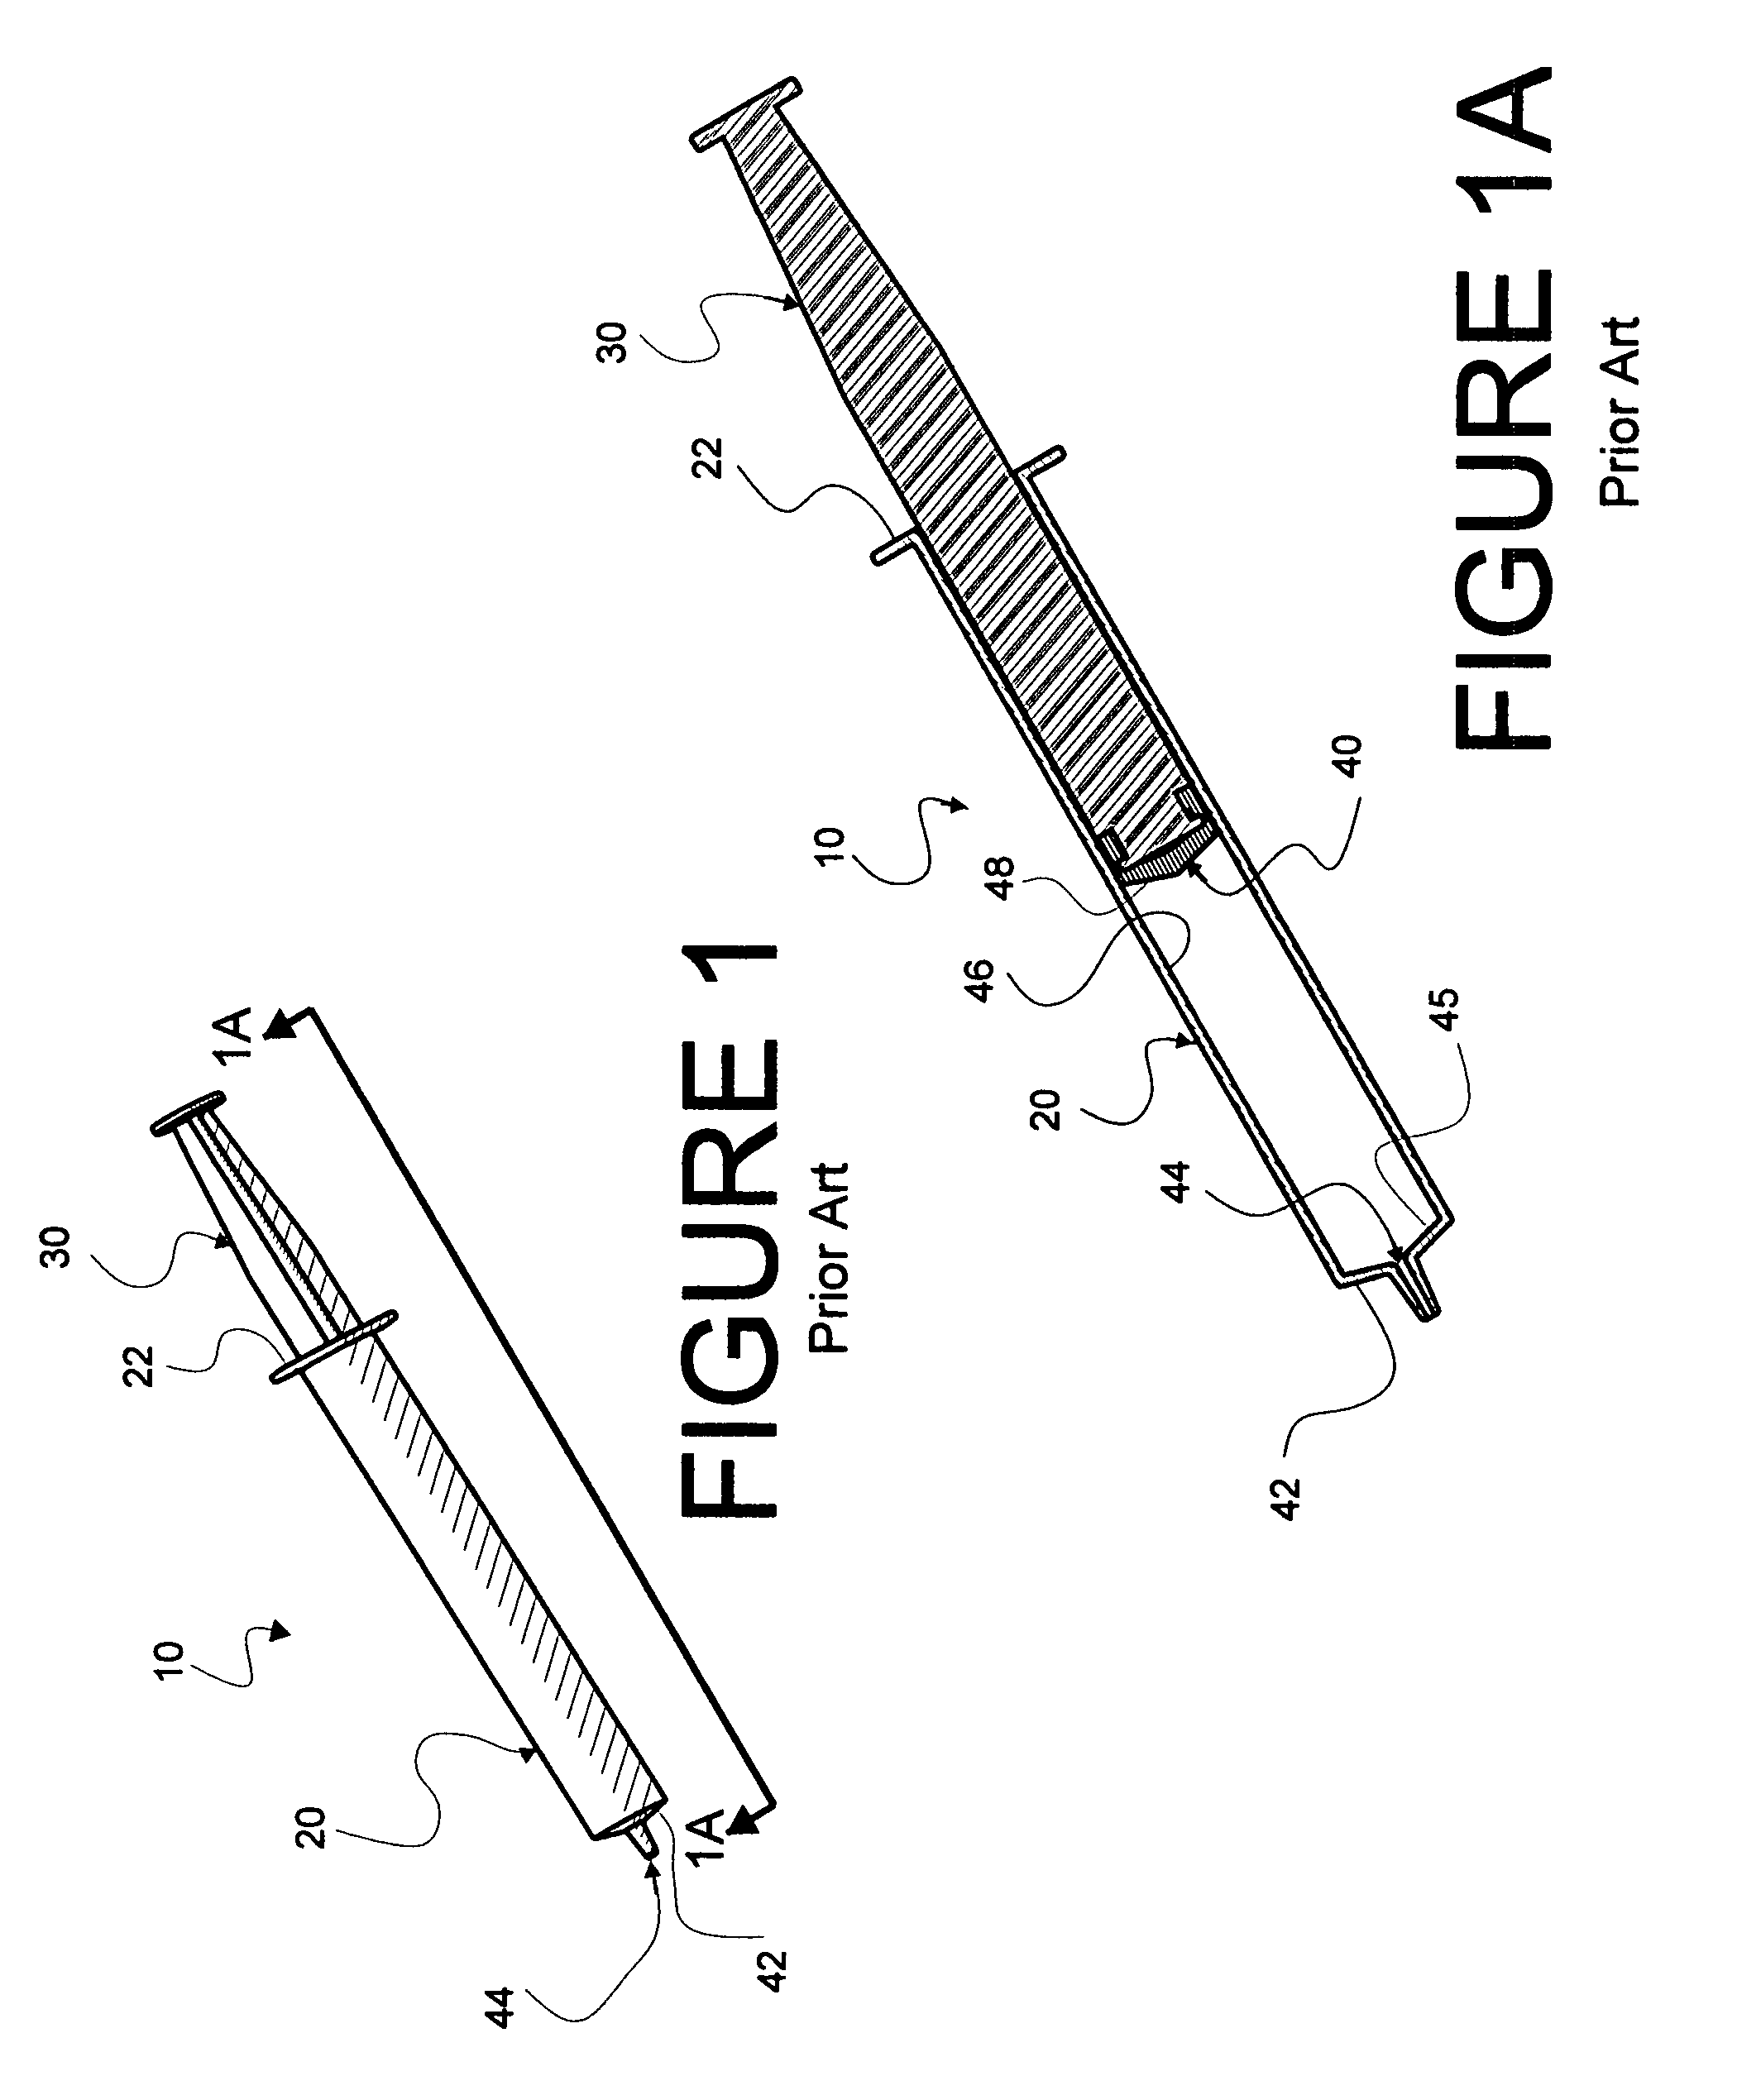 Multi-chamber, sequentially dispensing syringe